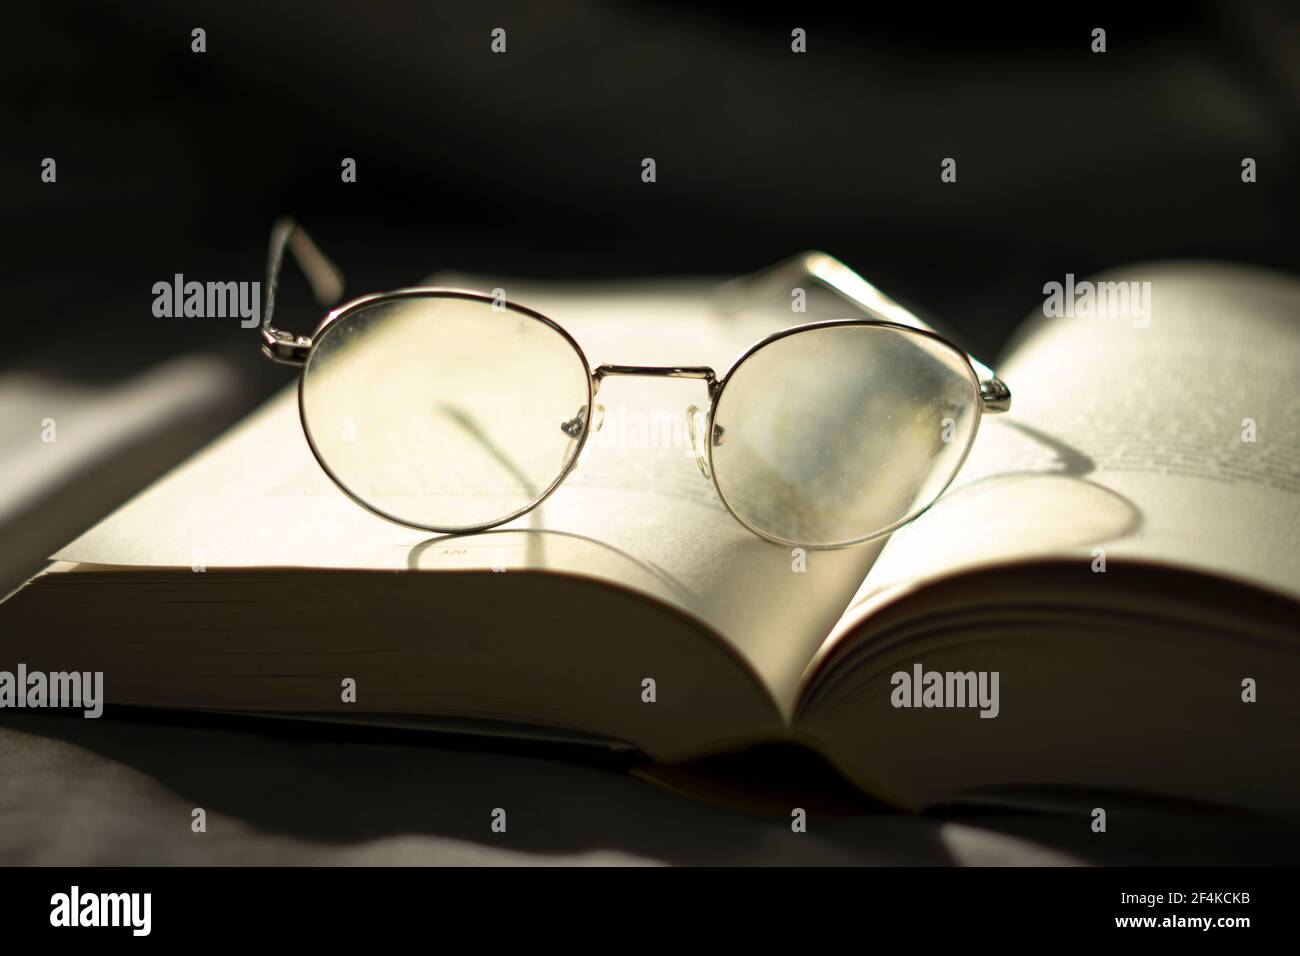 wisdown and knowledge. reading a book. eyeglasses laid up on a book. Stock Photo